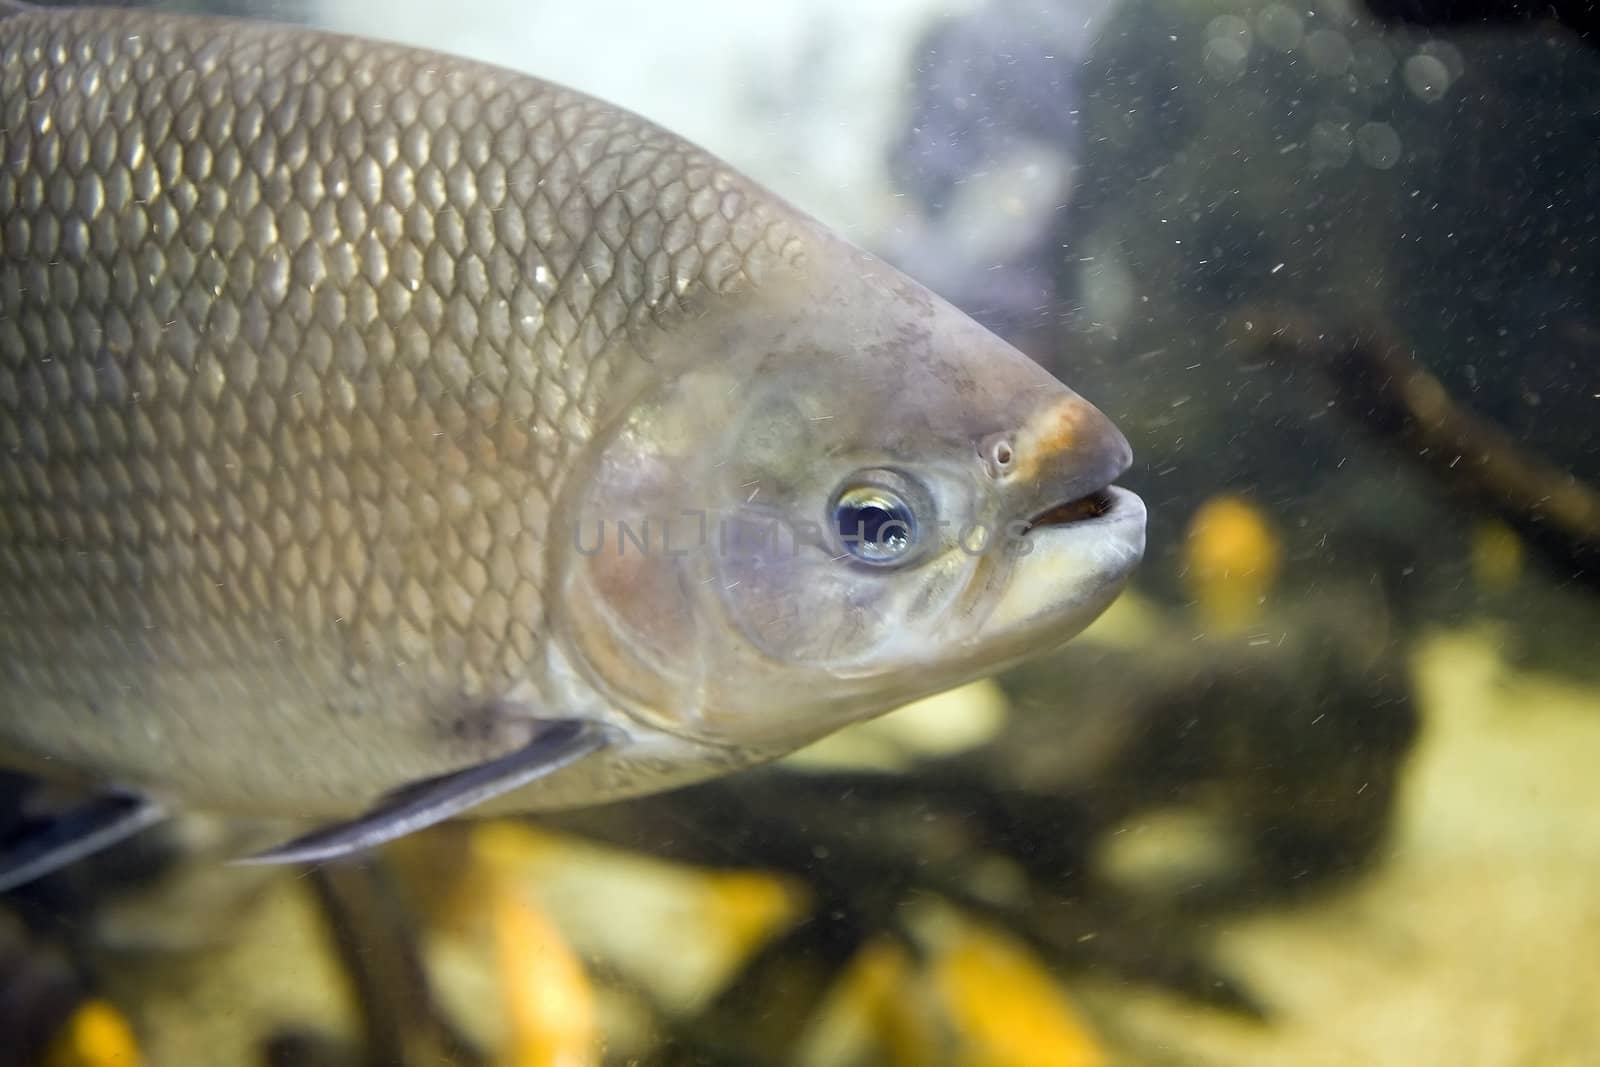 Close up of a freshwater Tambaquifish, Colossoma macropomum, showing silver scales, gills, eye, nostril and open mouth. The fish is swimming in an aquarium.